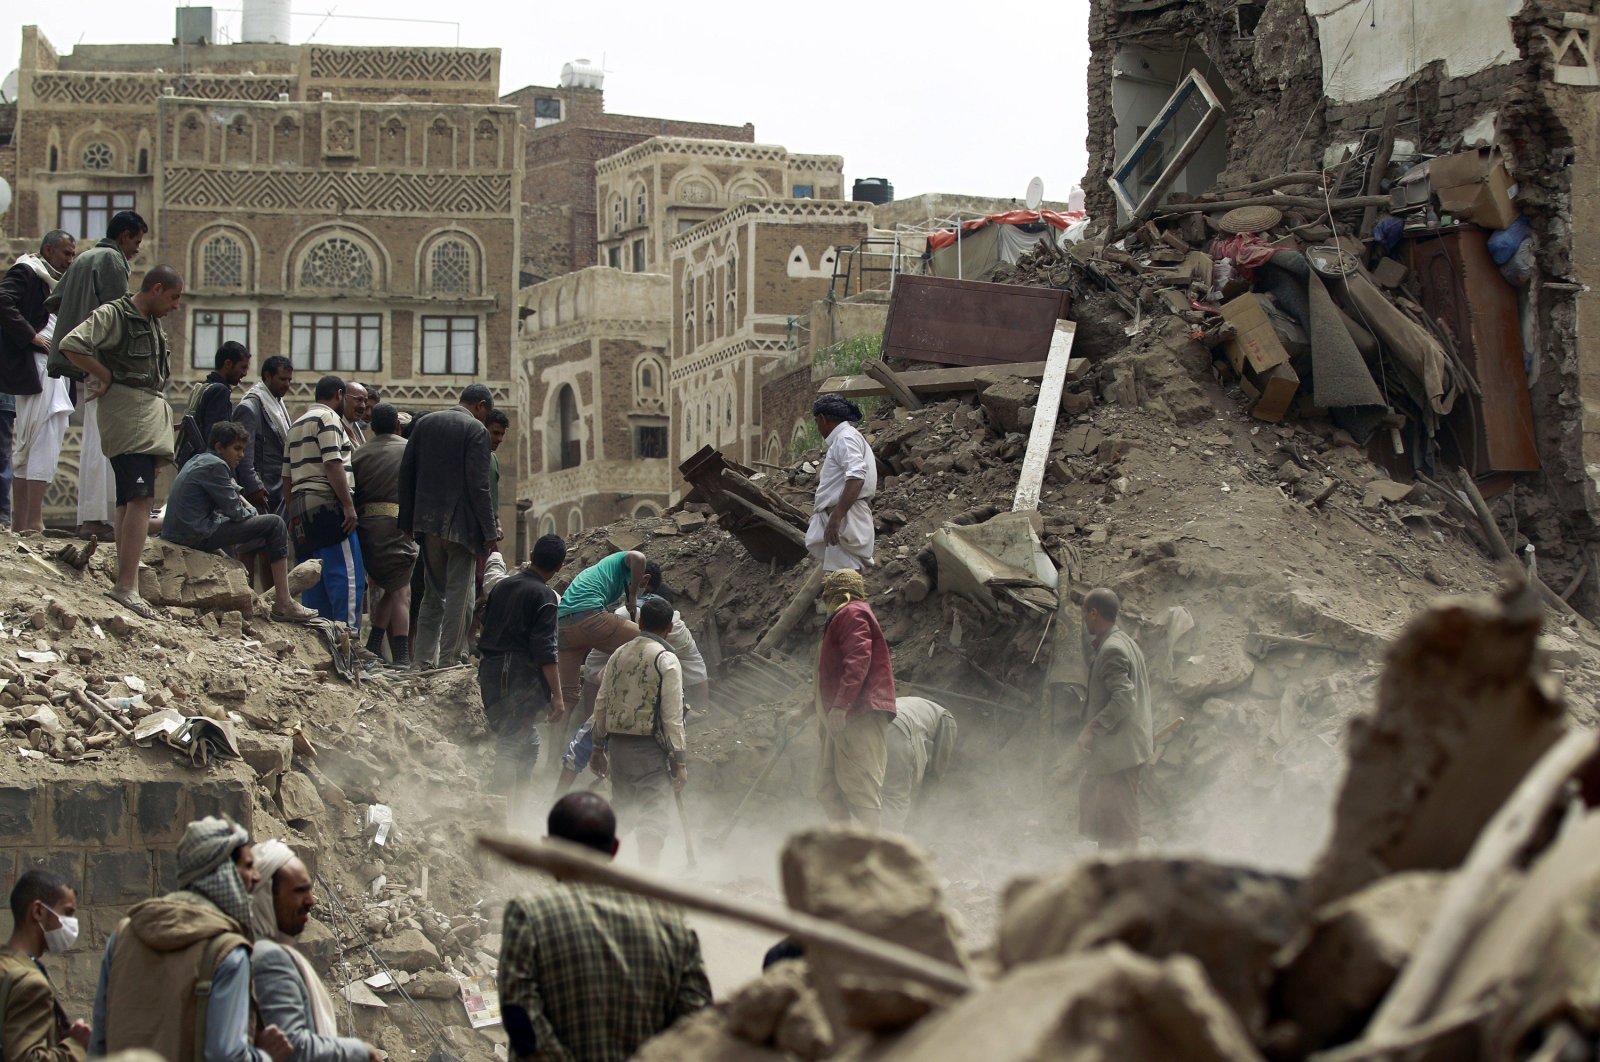 Yemenis search for survivors under the rubble of houses in a UNESCO-listed heritage site in the old city of the Yemeni capital, Sanaa, on June 12, 2015. (AFP Photo)